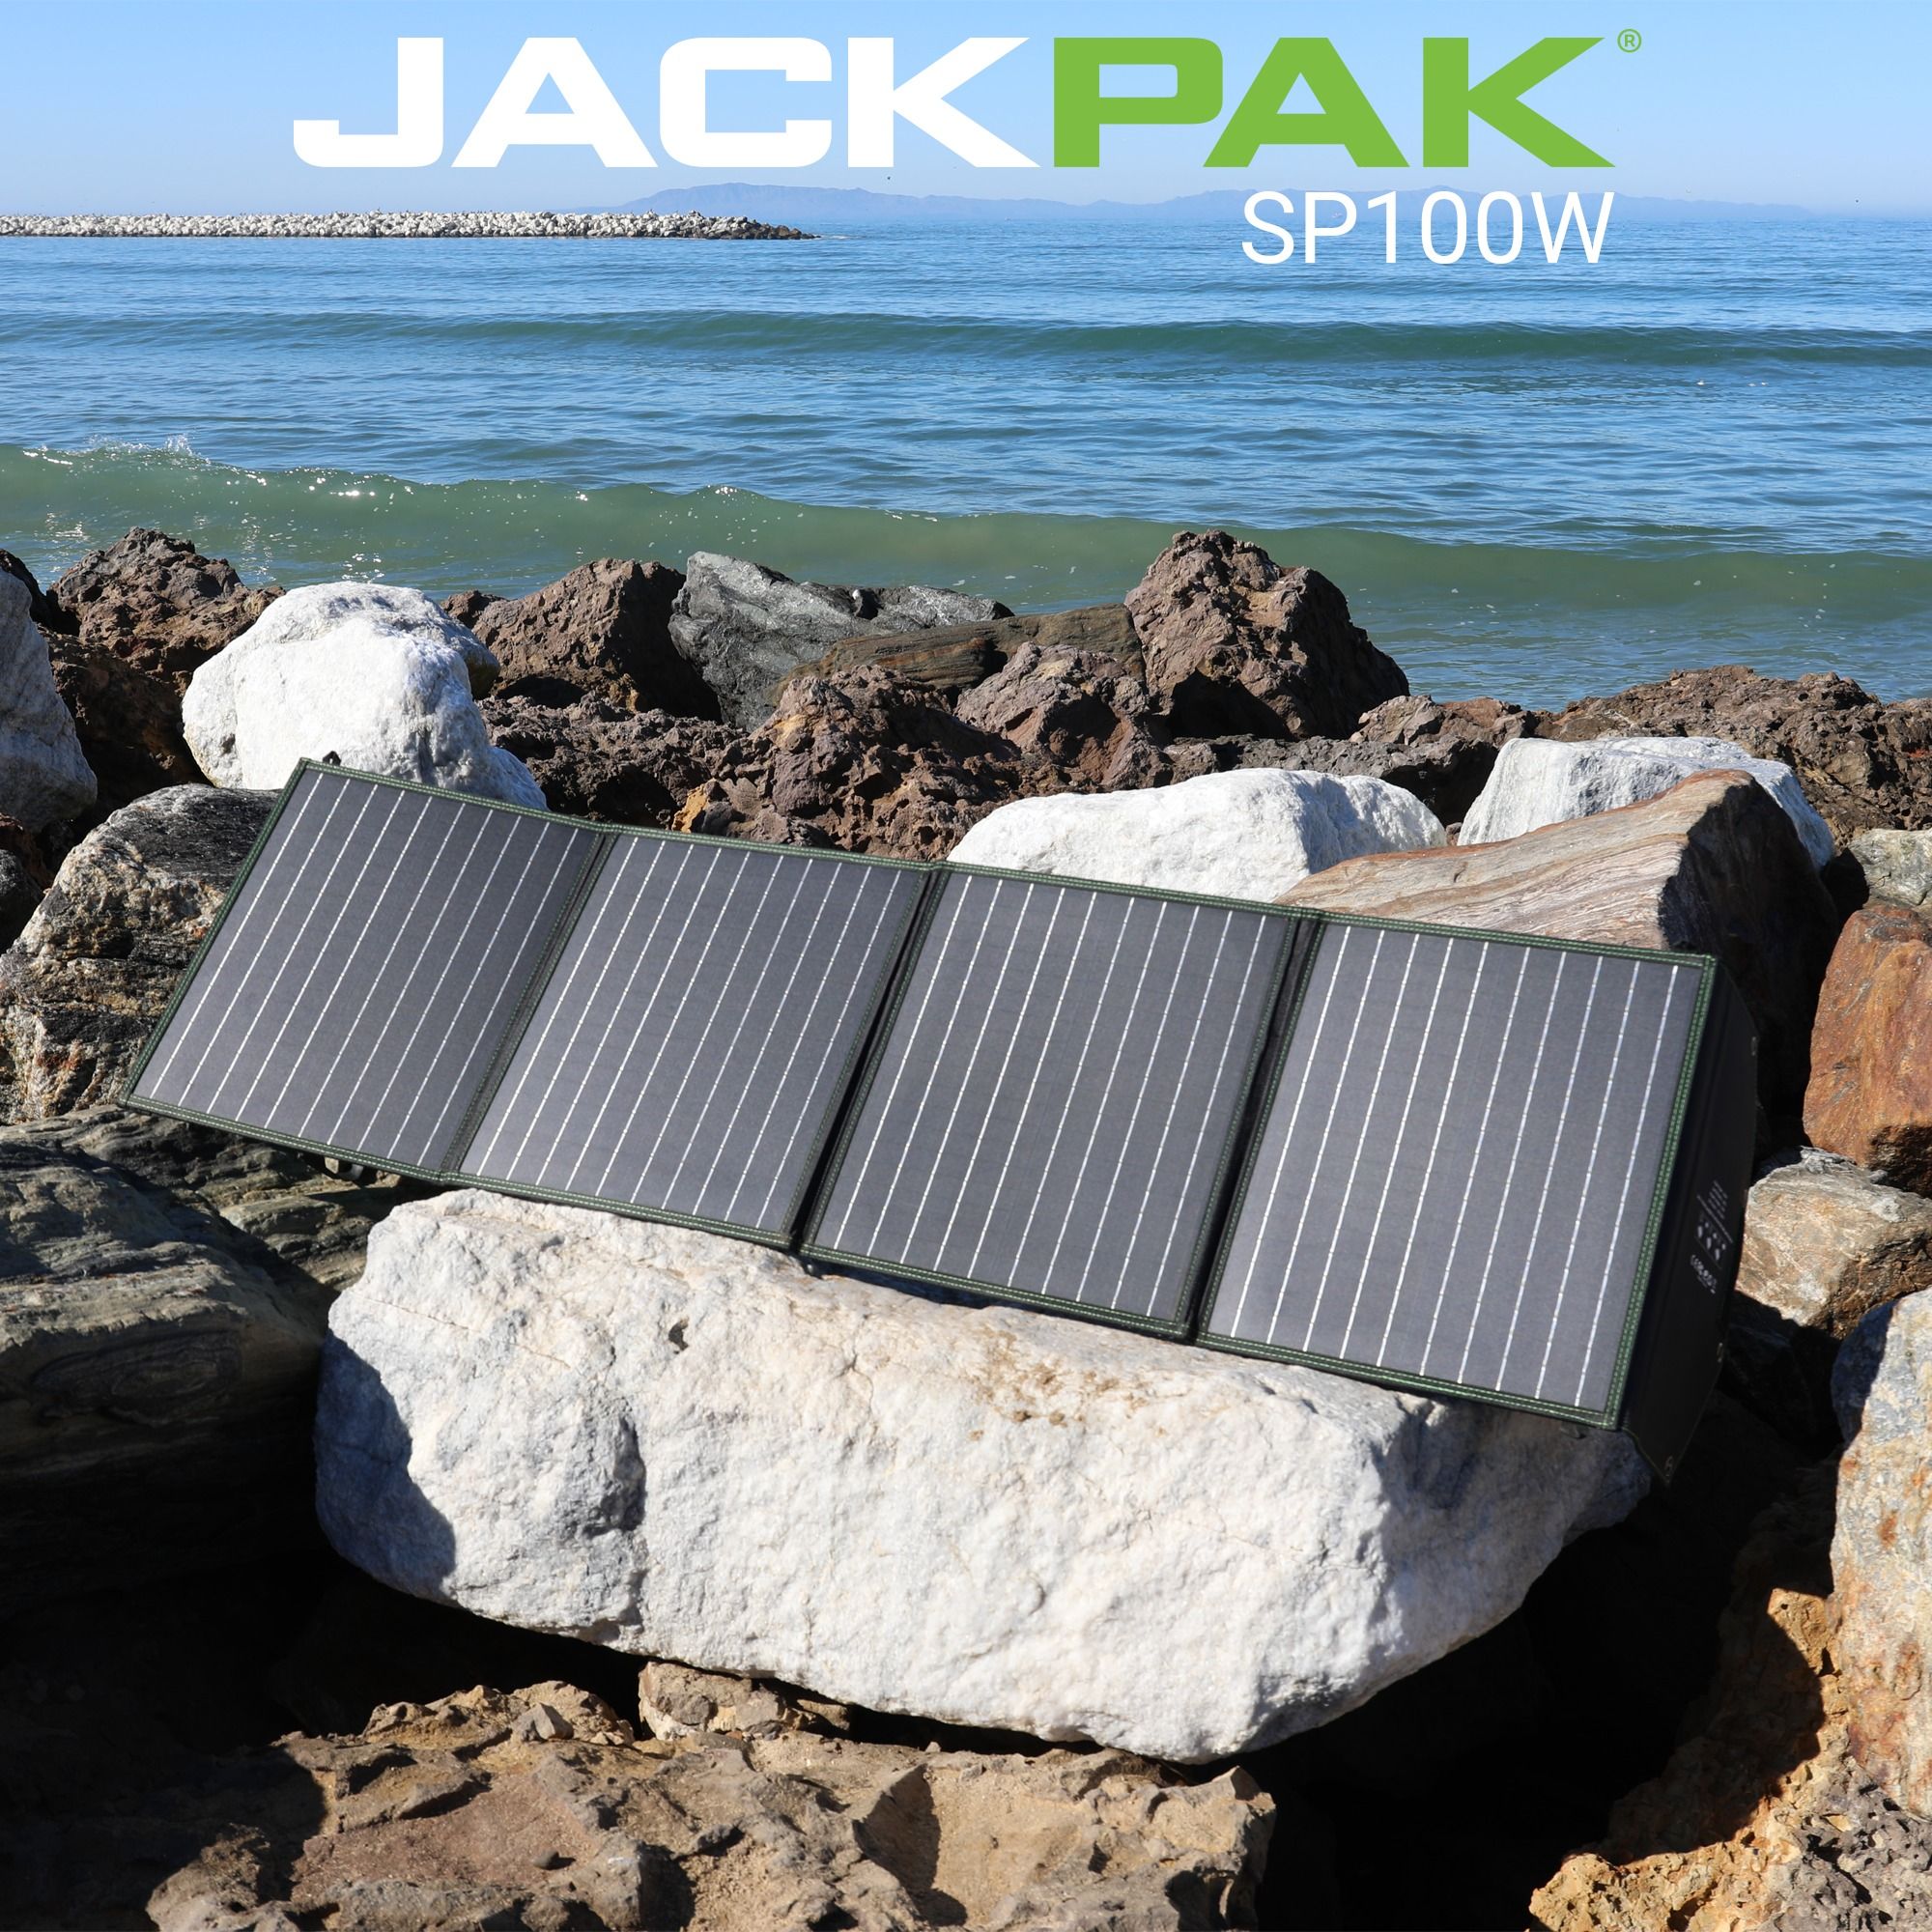 The new JackPak SP100W is a game-changer when it comes to charging up compatible power stations. Now when you’re on your next outdoor adventure you won’t have to worry about how you’re going to keep your devices charged.